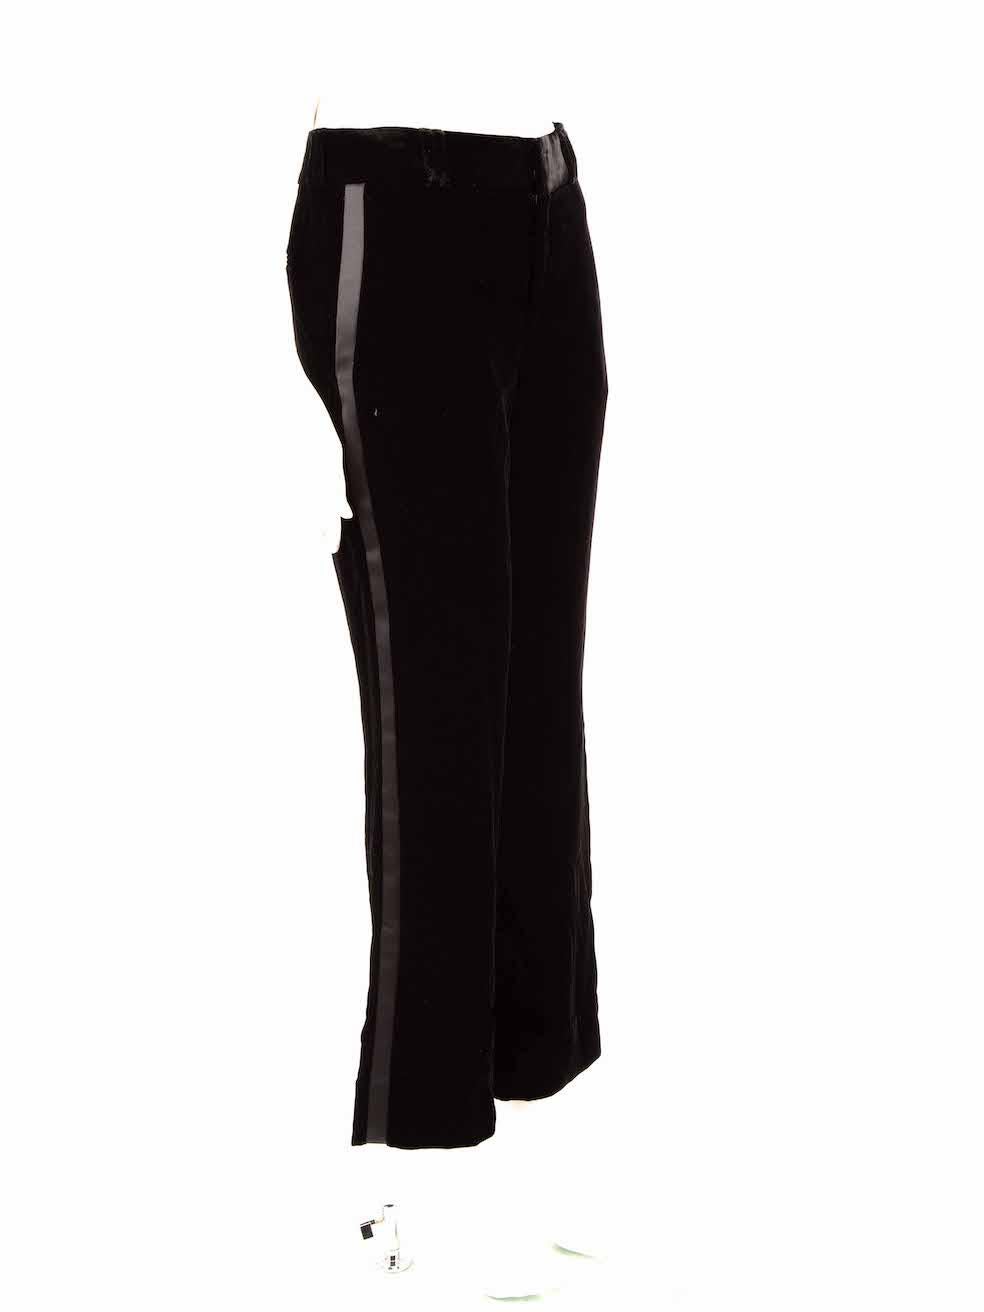 CONDITION is Good. Minor wear of trousers is evident. Light discolouration on the rear bottom left side of the trouser. The rear inner waistband seam has been altered on this used Saint Laurent designer resale item.
 
 
 
 Details
 
 
 Black
 
